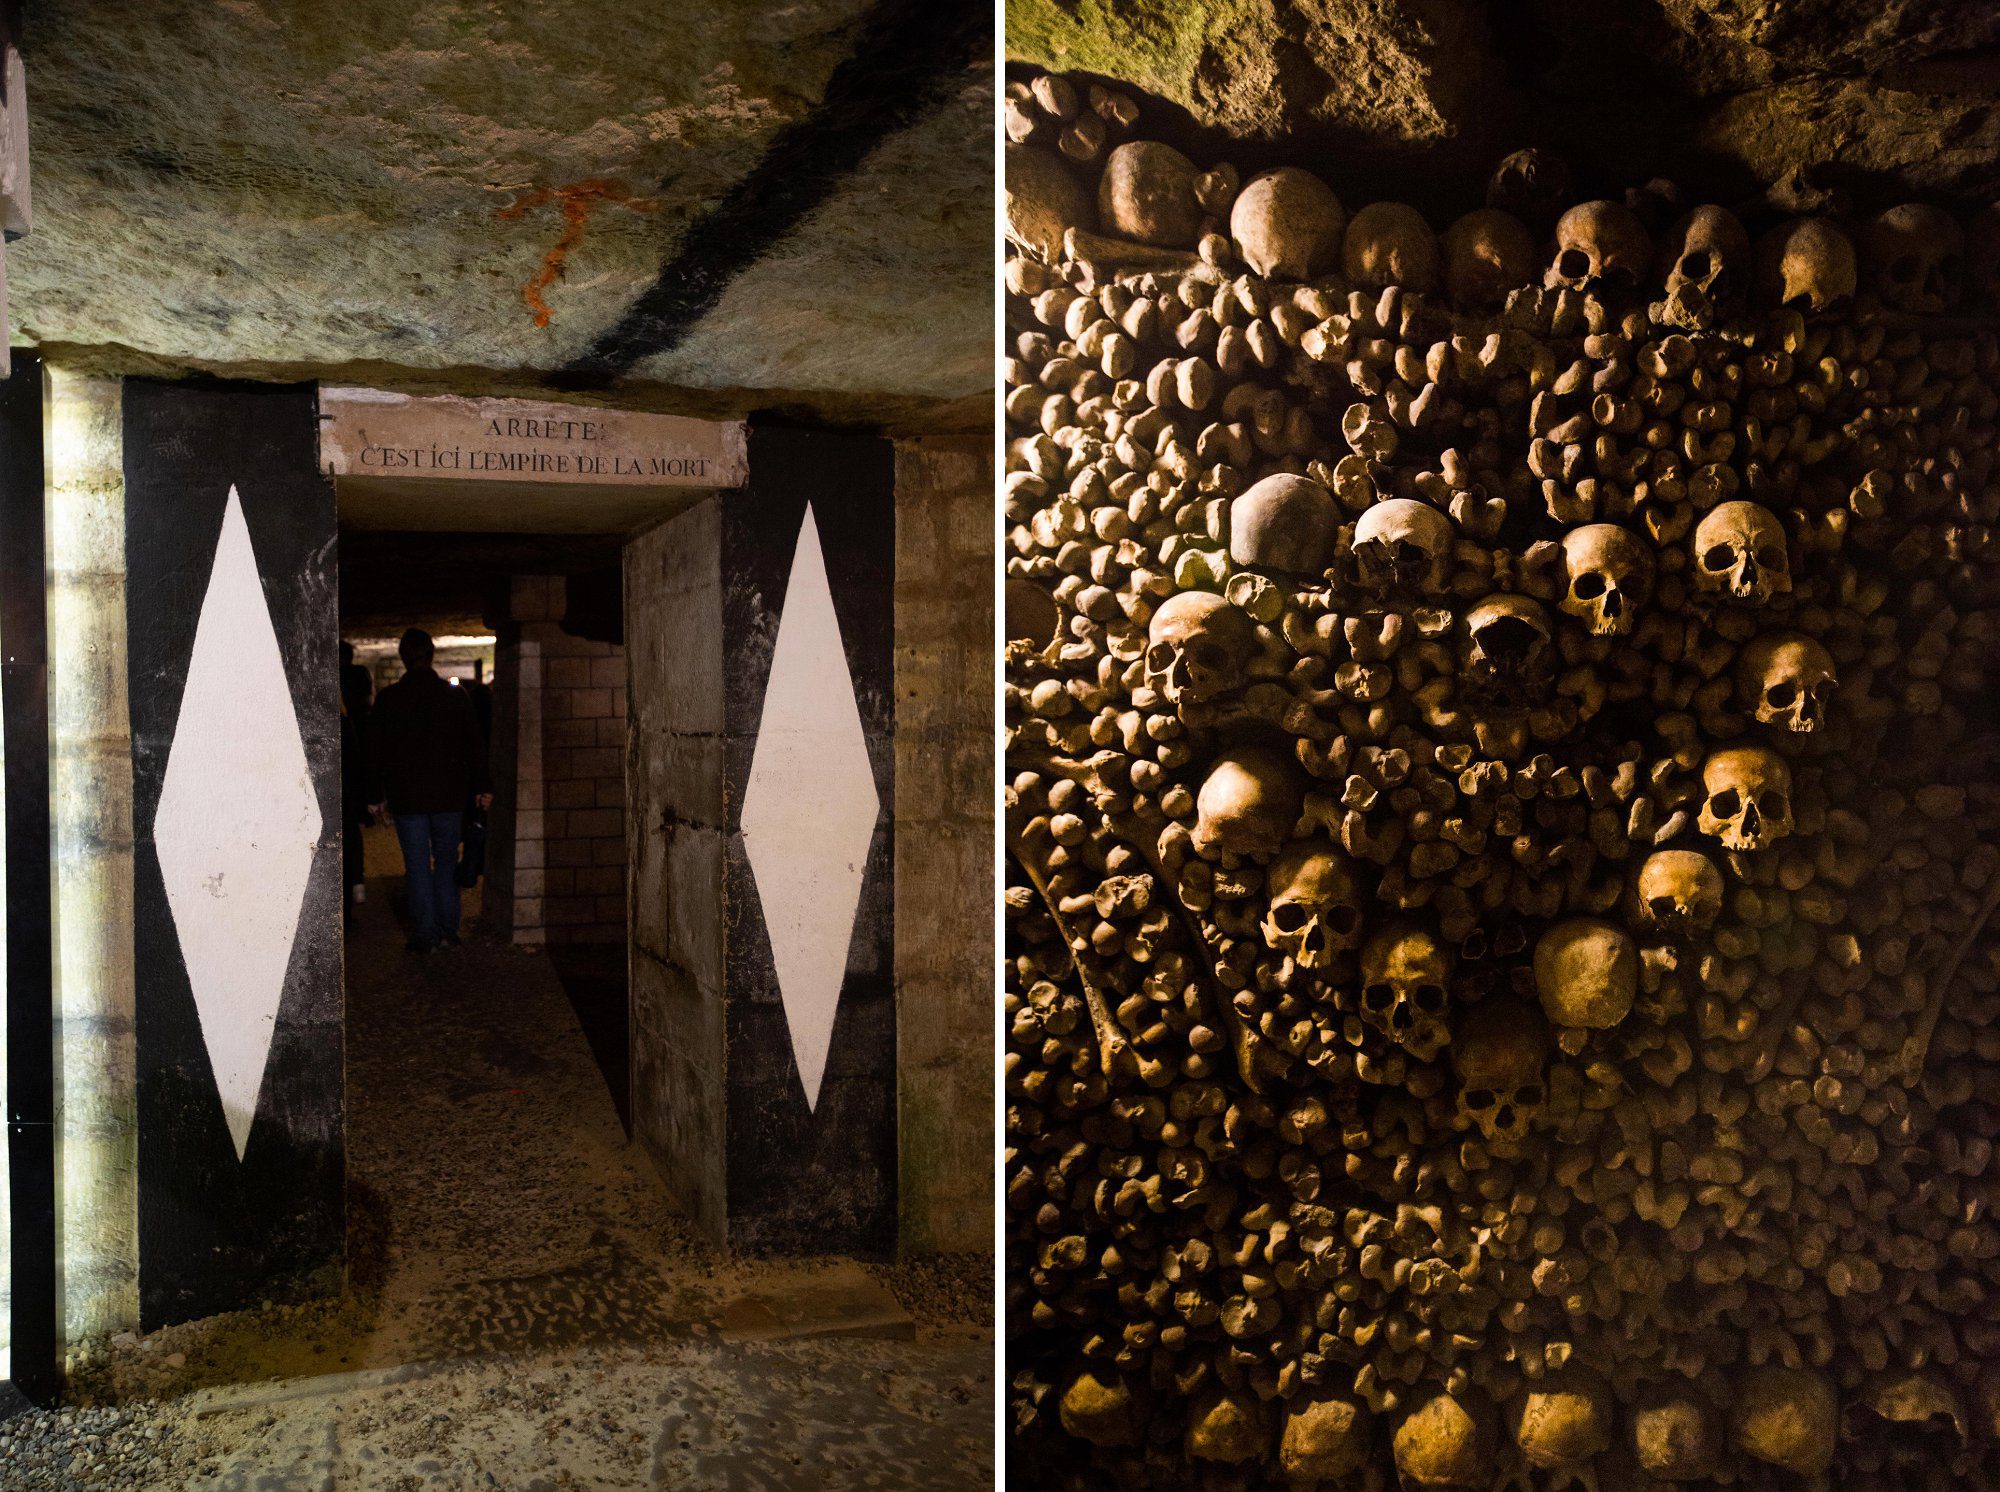 Entrance to the Catacombes of Paris